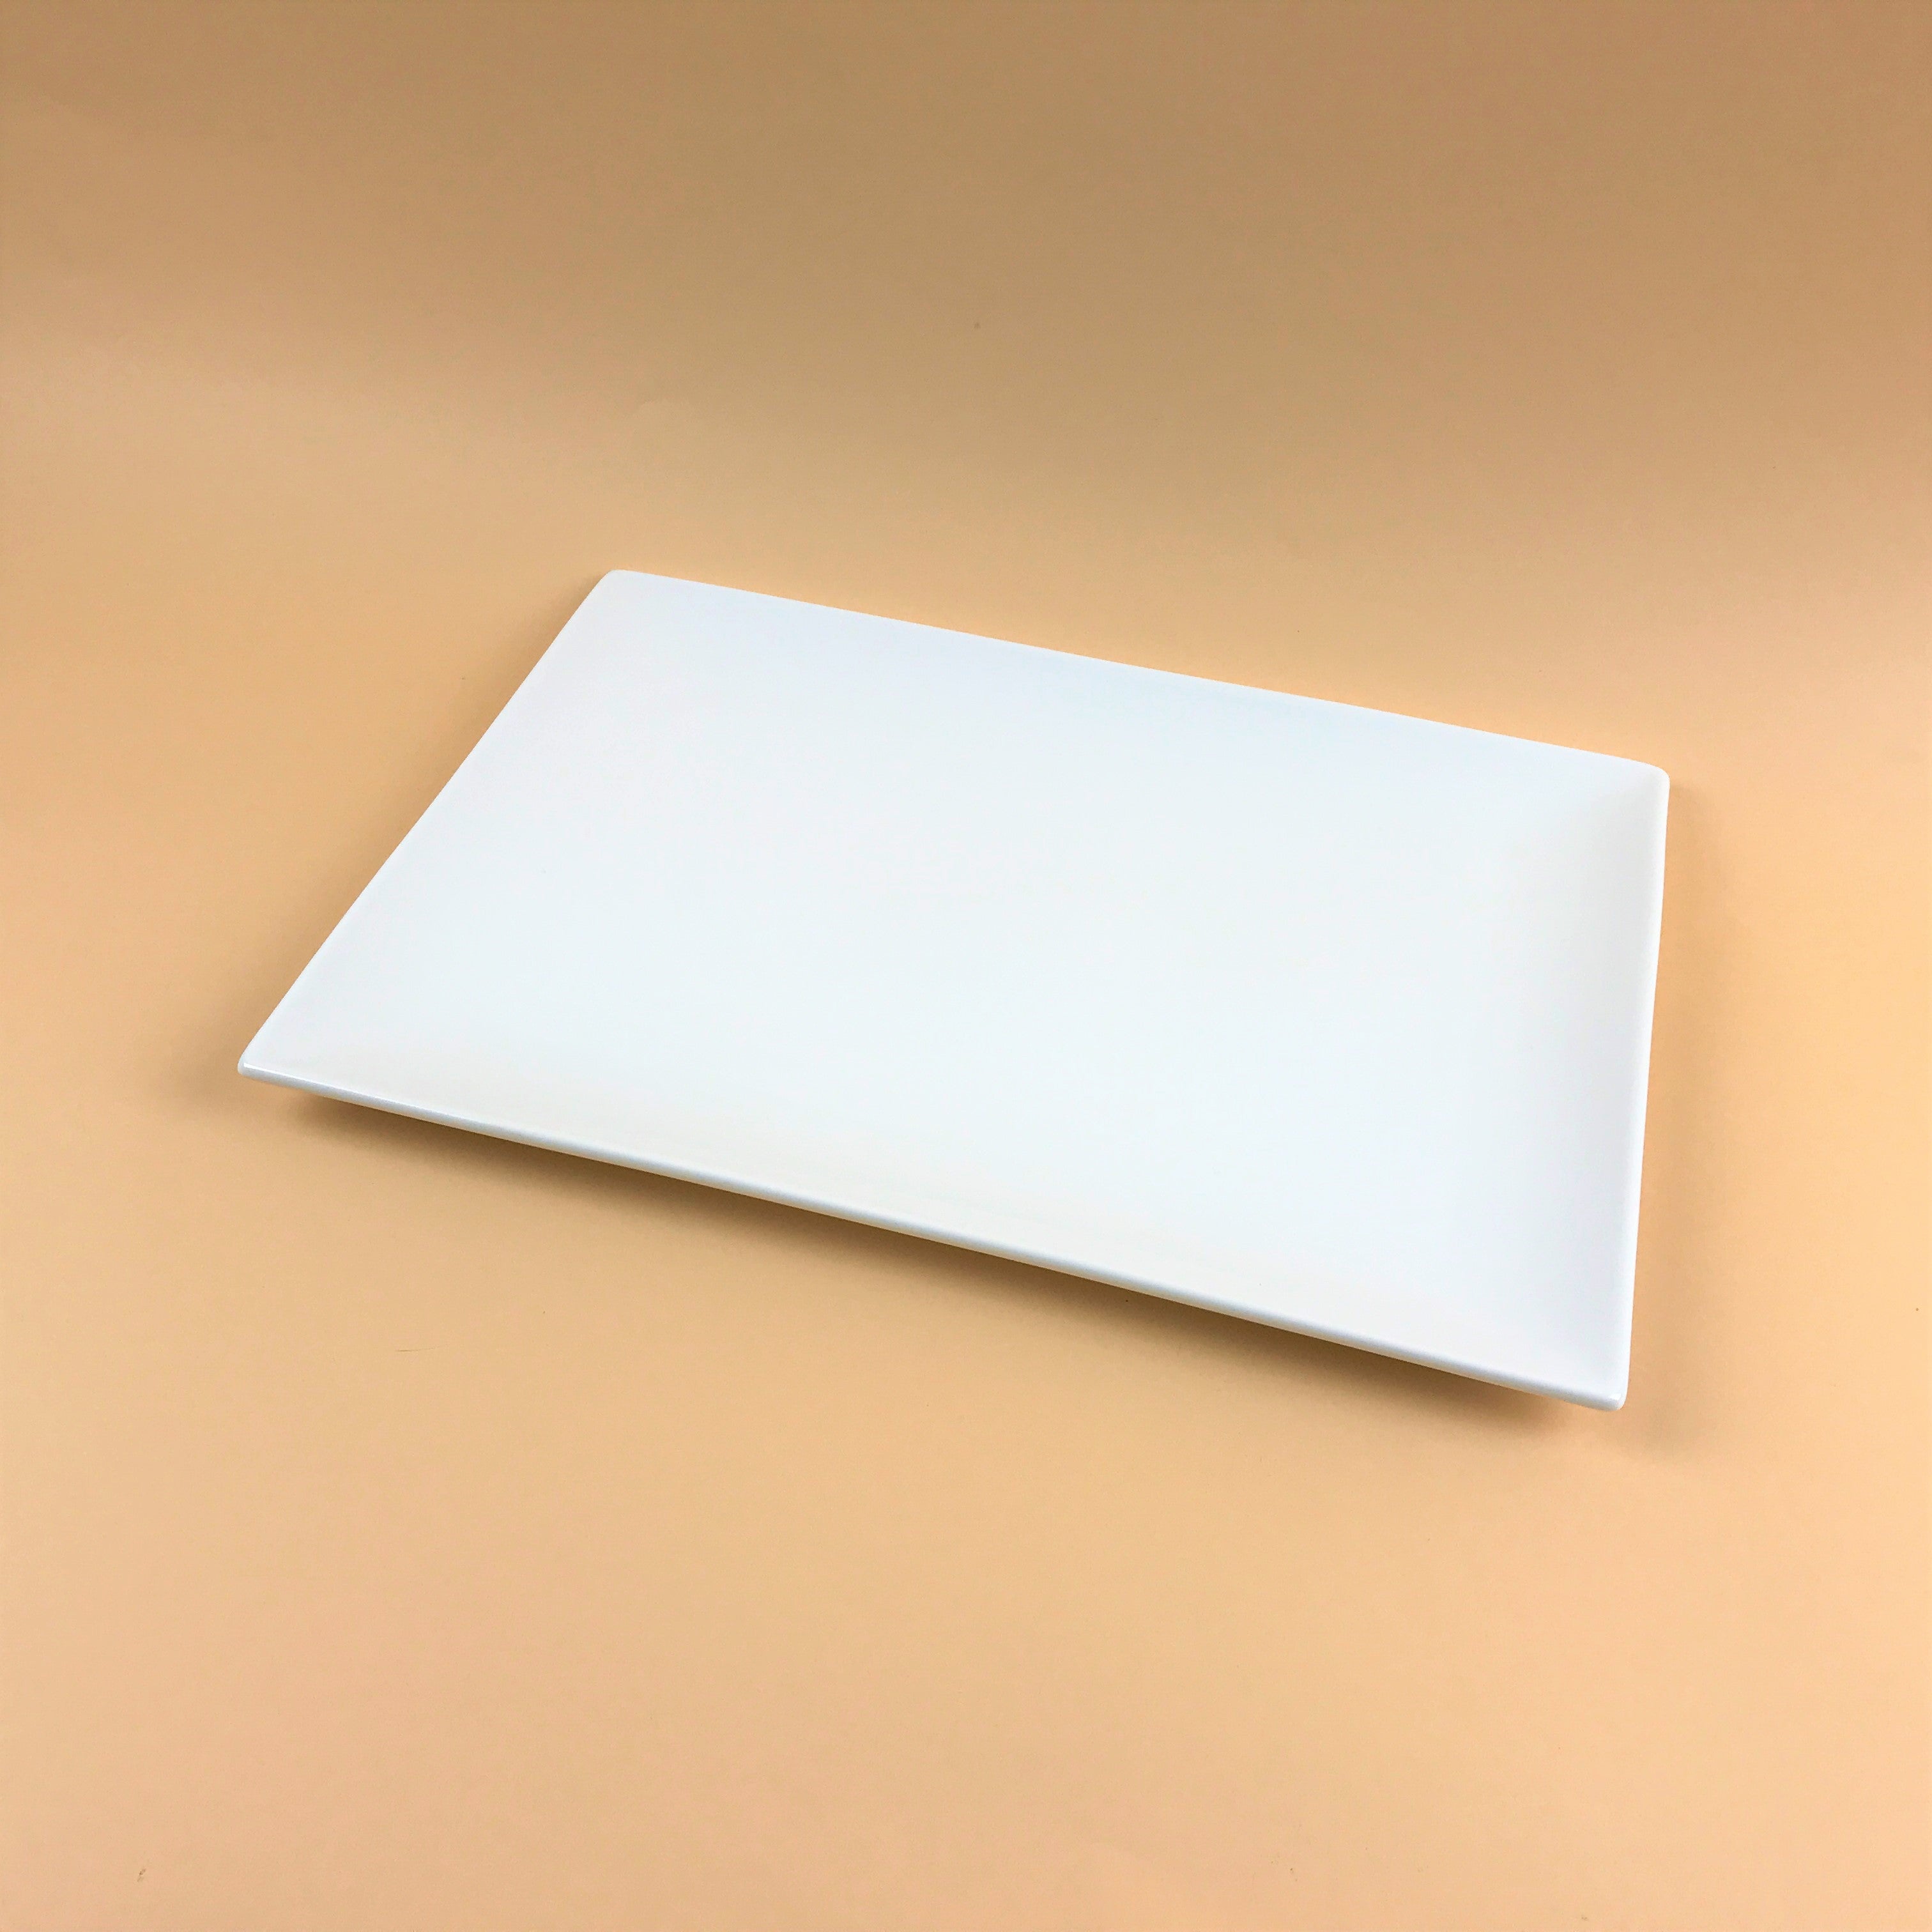 Heavy Duty Restaurant-Use White Square Plates in 6 sizes, 5 1/4 